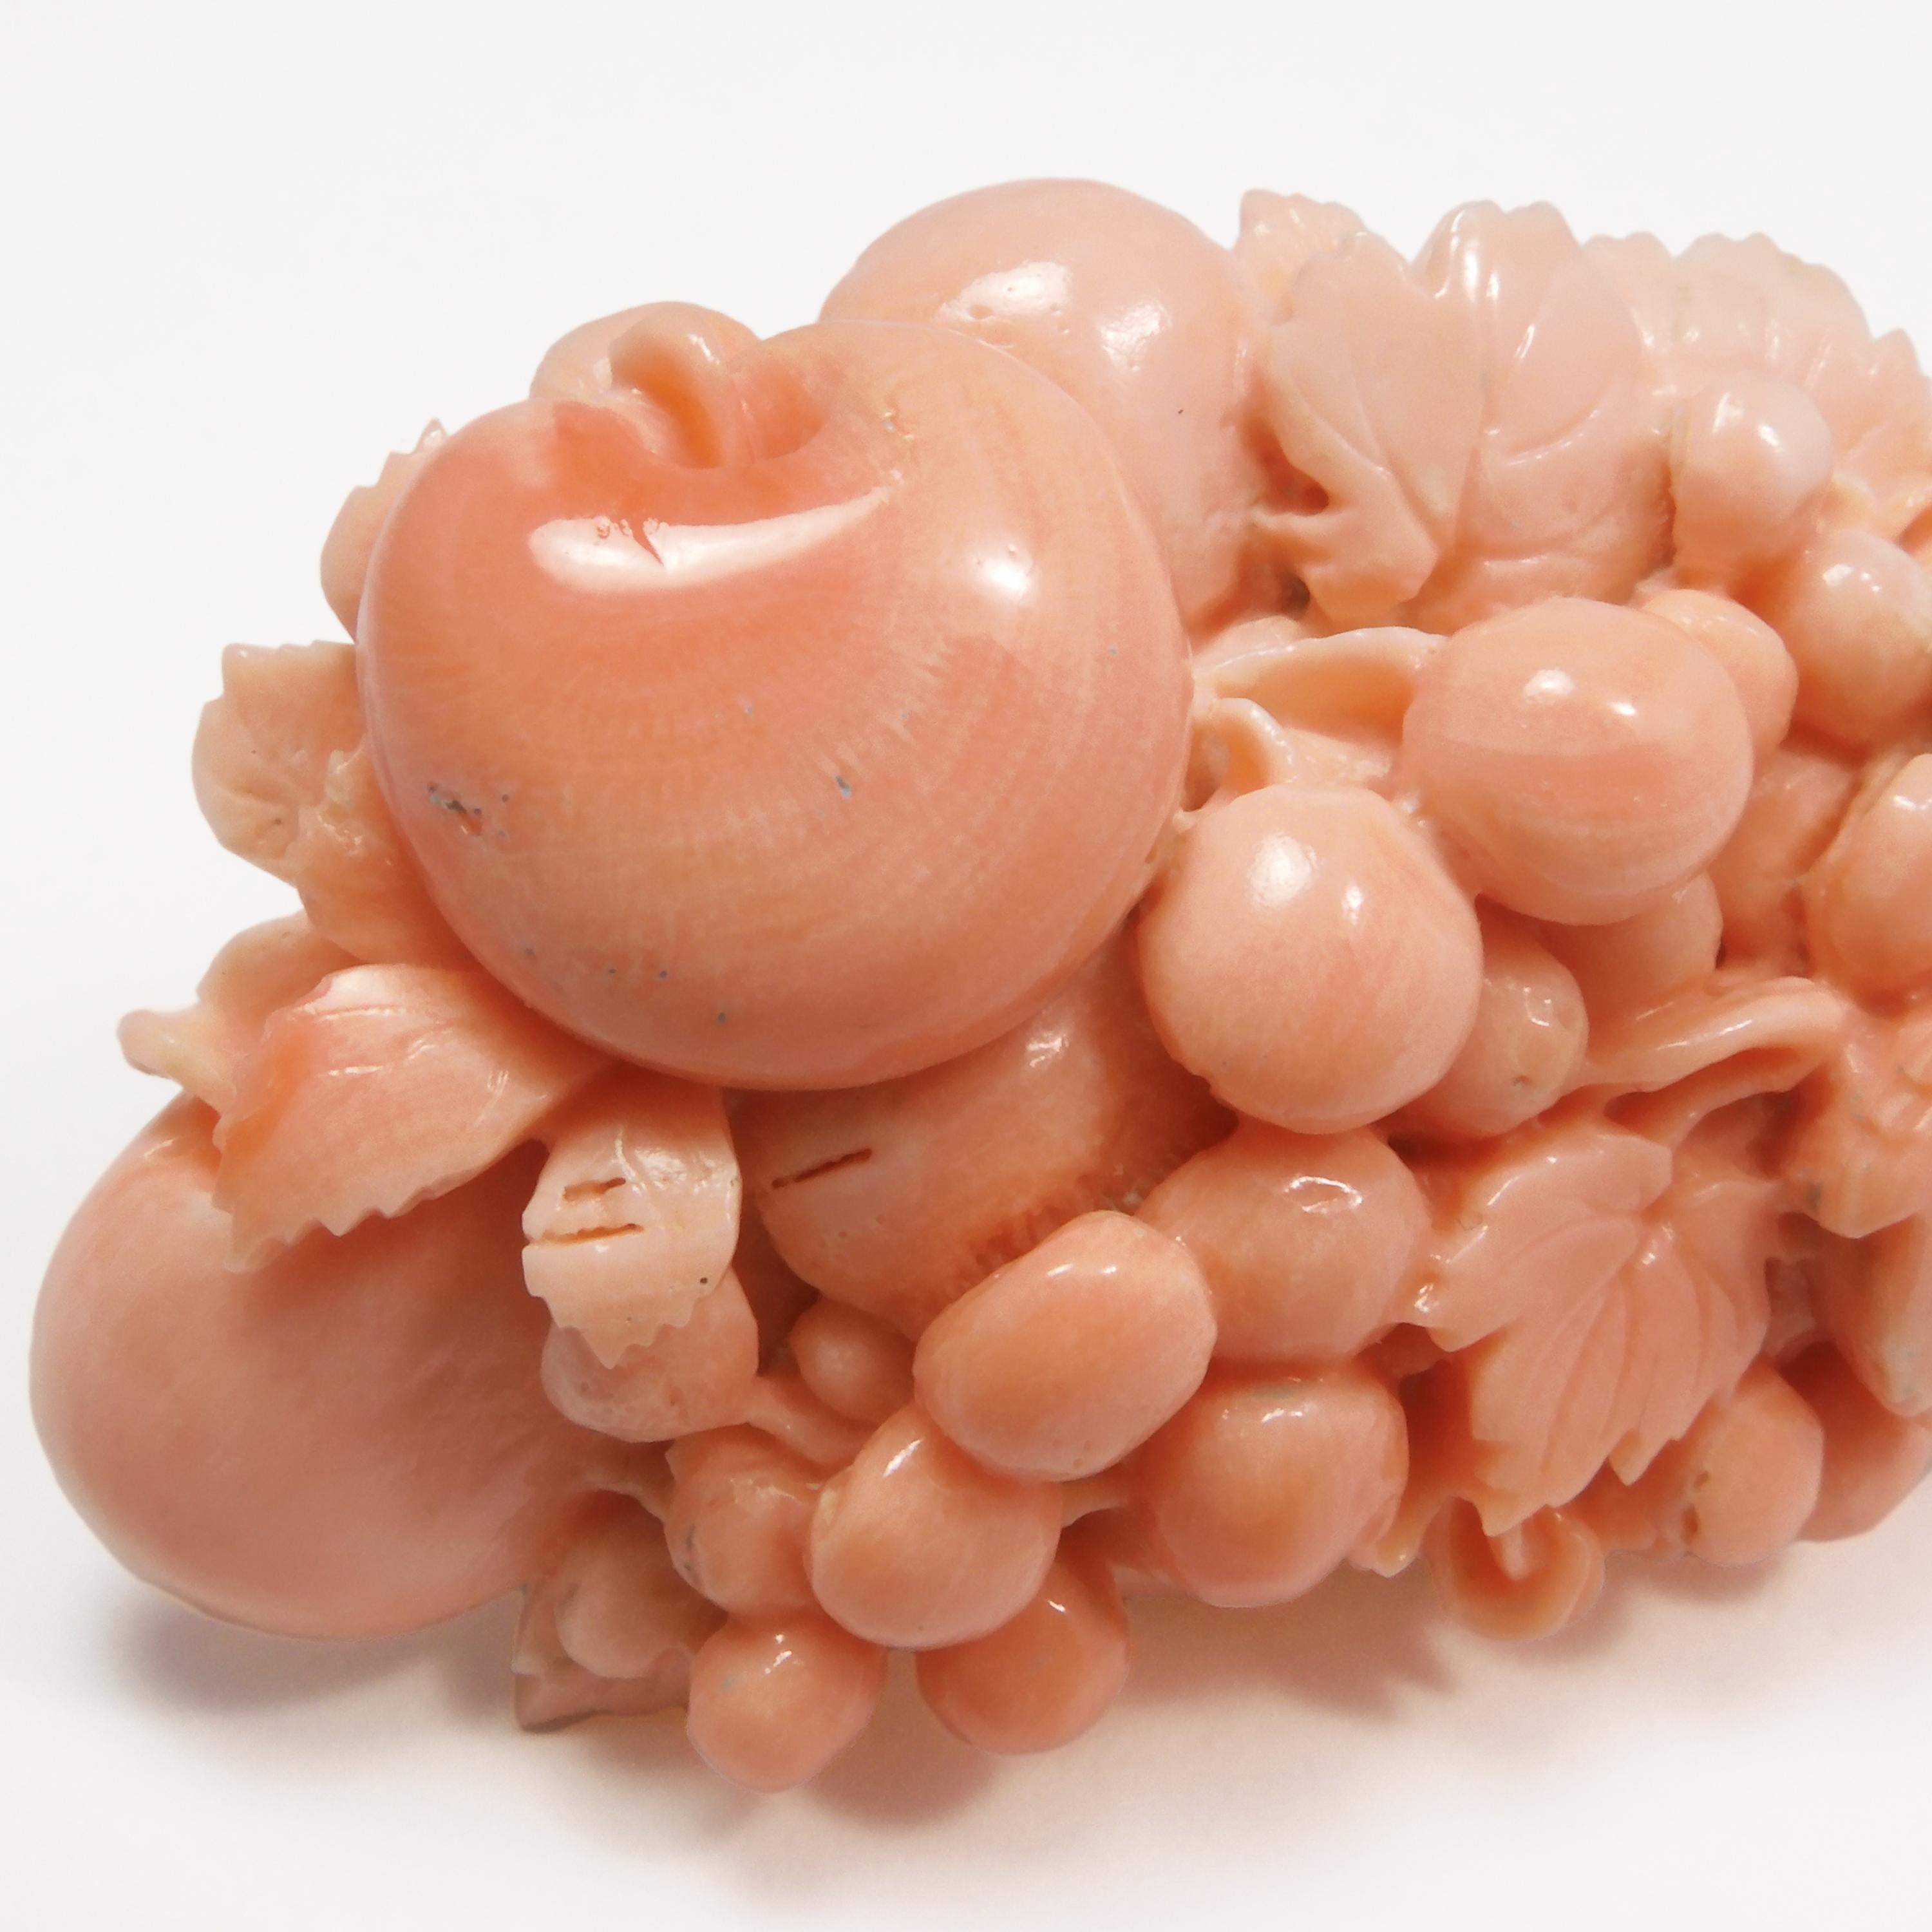 Vintage Japanese Momoiro Sango Carved Coral Plate Fruits For Sale 1